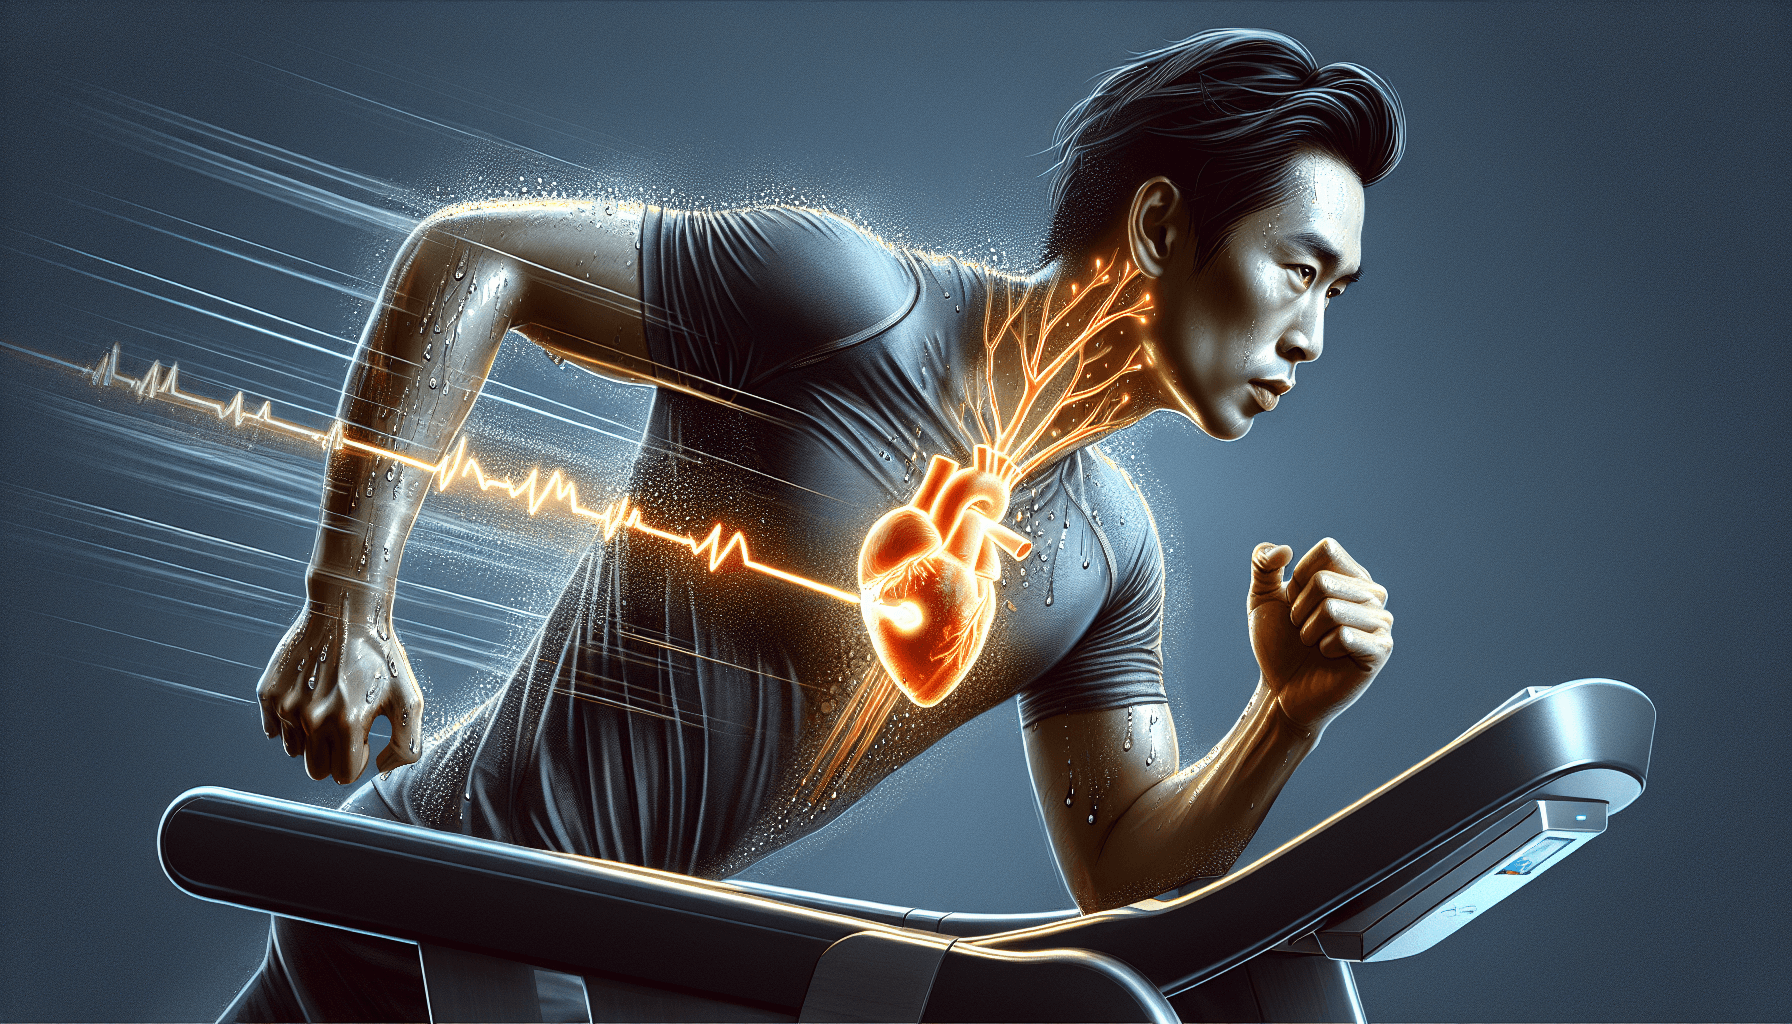 Illustration of a person engaging in endurance exercise risk for exercise induced afib